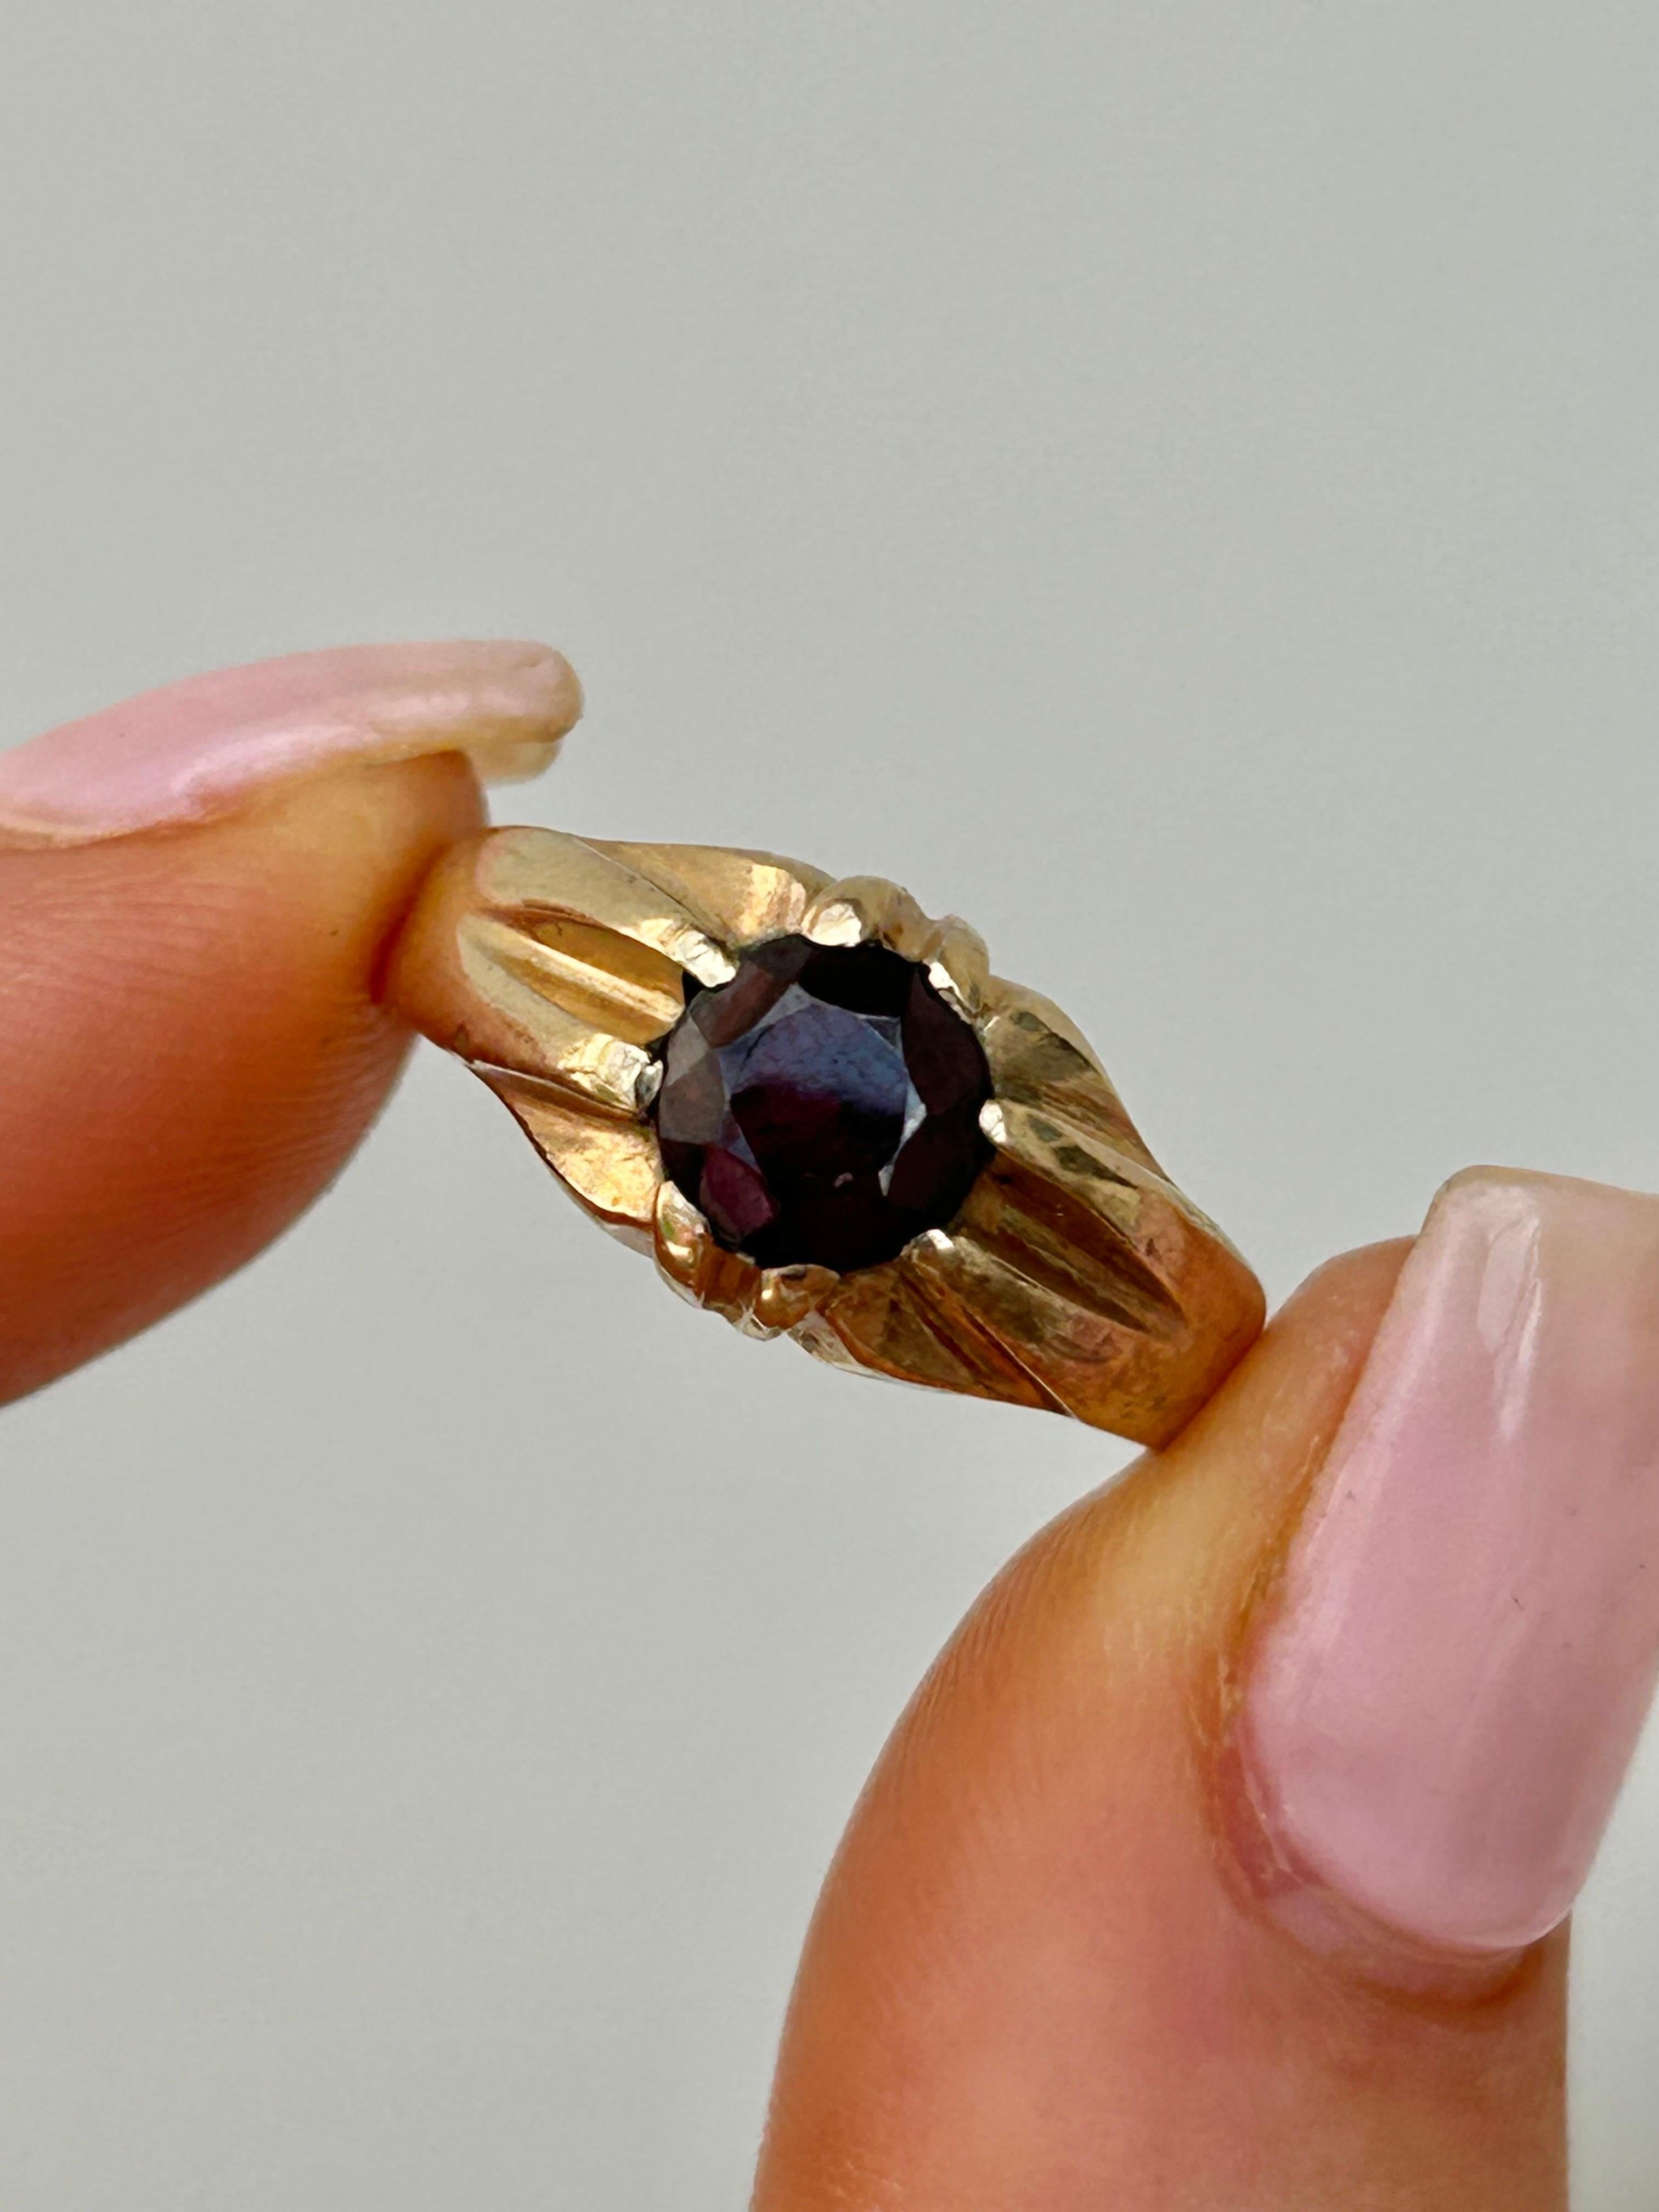 Chunky Vintage 9ct Gold Garnet Signet Ring 

gorgeous glowing garnet! excellent signet ring!  

The item comes without the box in the photos but will be presented in a gembank1973 gift box
 
Measurements: Weight 5.95g, size UK Q1/2 US 8 1/2, head of